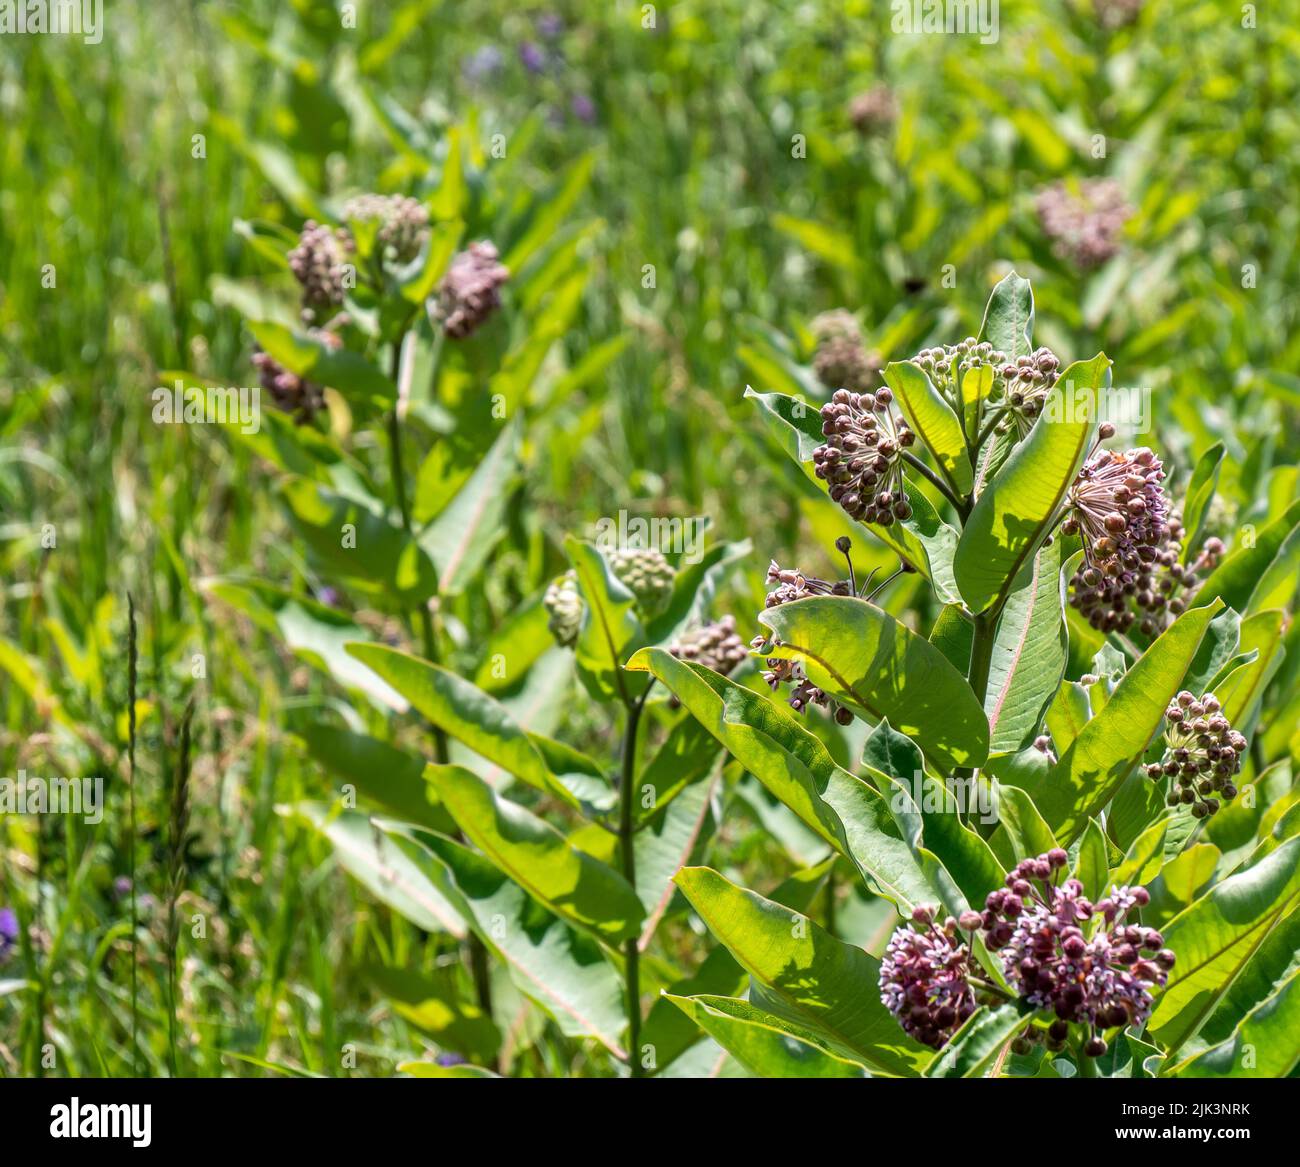 Close-up of the purple flowers on a milkweed plant in bloom that is growing in a field on a warm summer day in July with a blurred background. Stock Photo